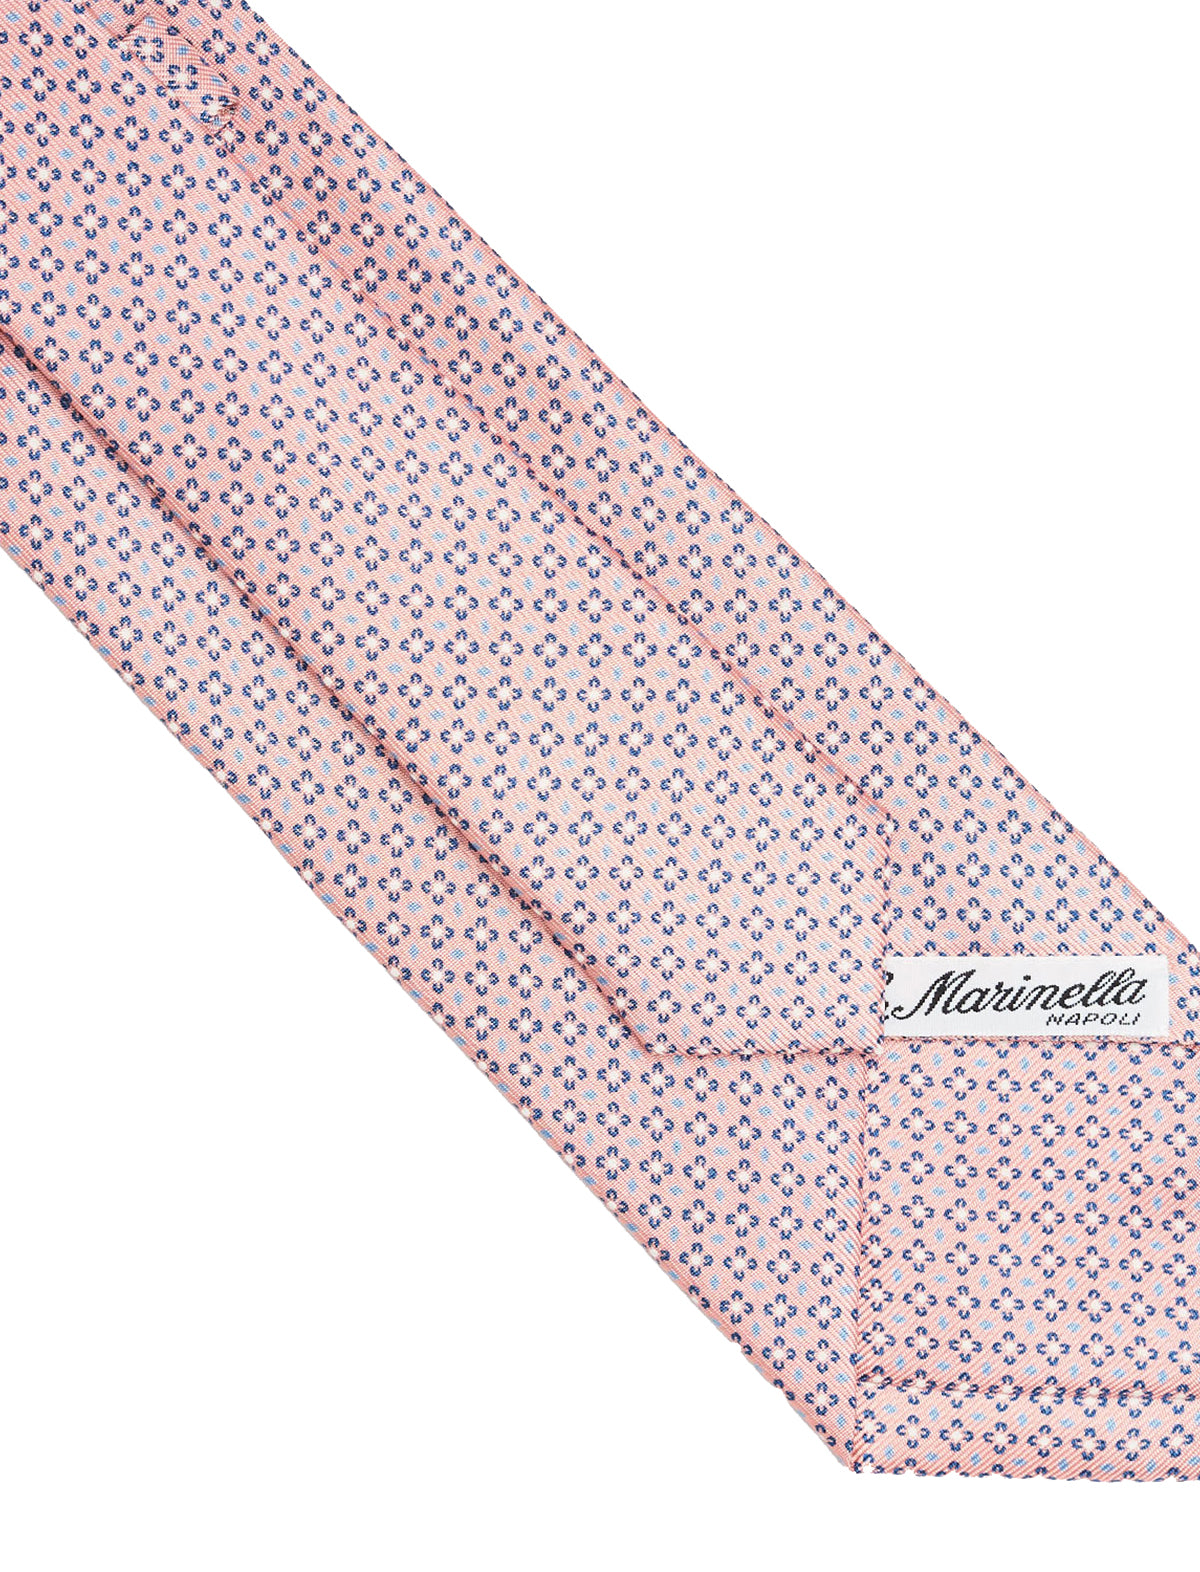 E.Marinella Hand-Printed Silk Tie in Light Pink Floral